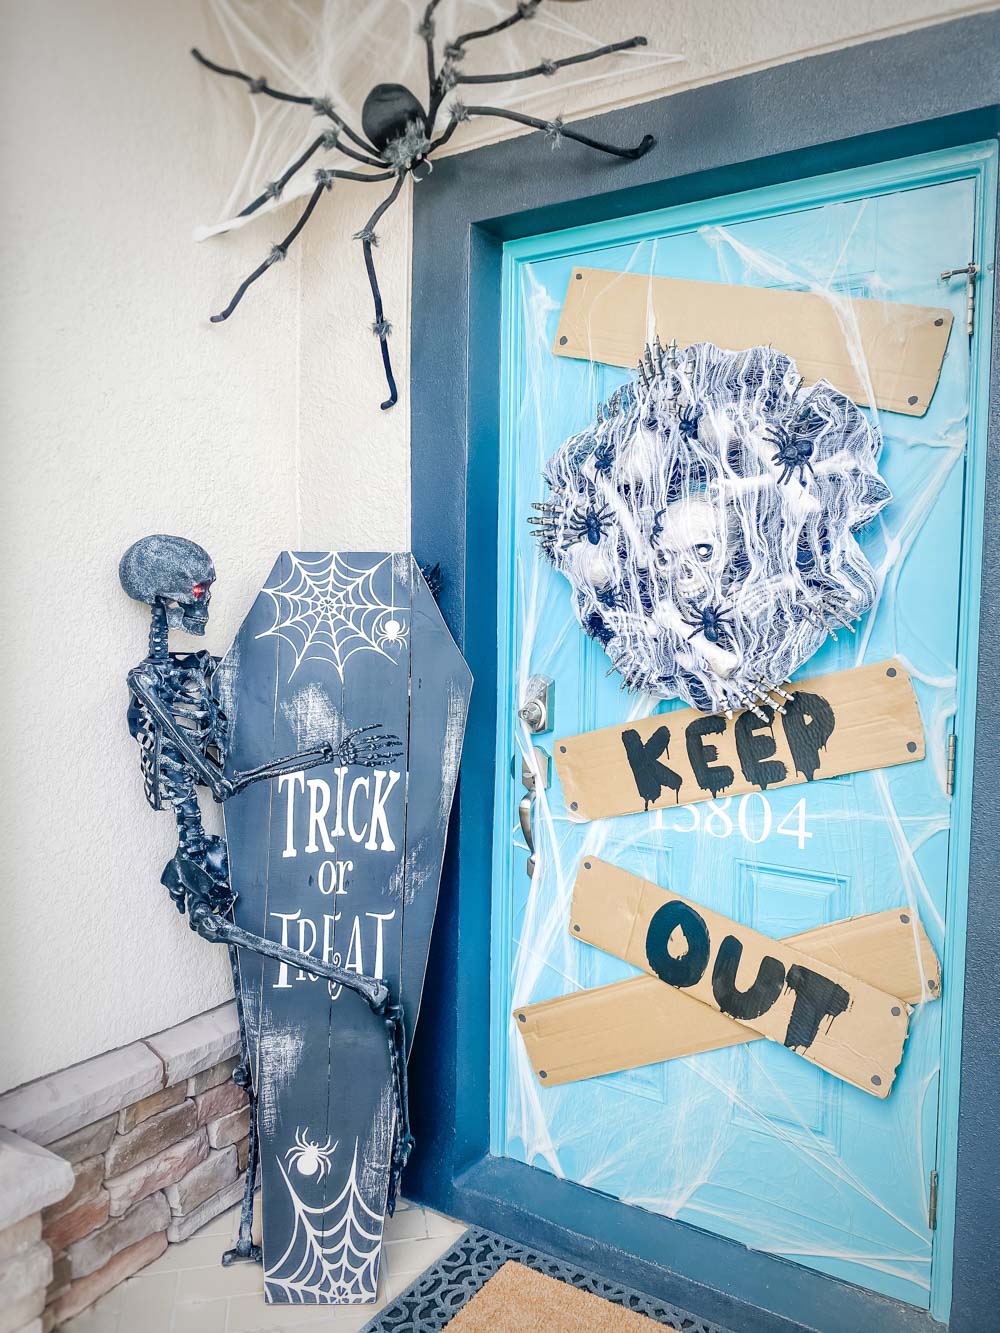 A front porch decorated for Halloween with skeletons, spiders, spider webs, and a keep out sign.